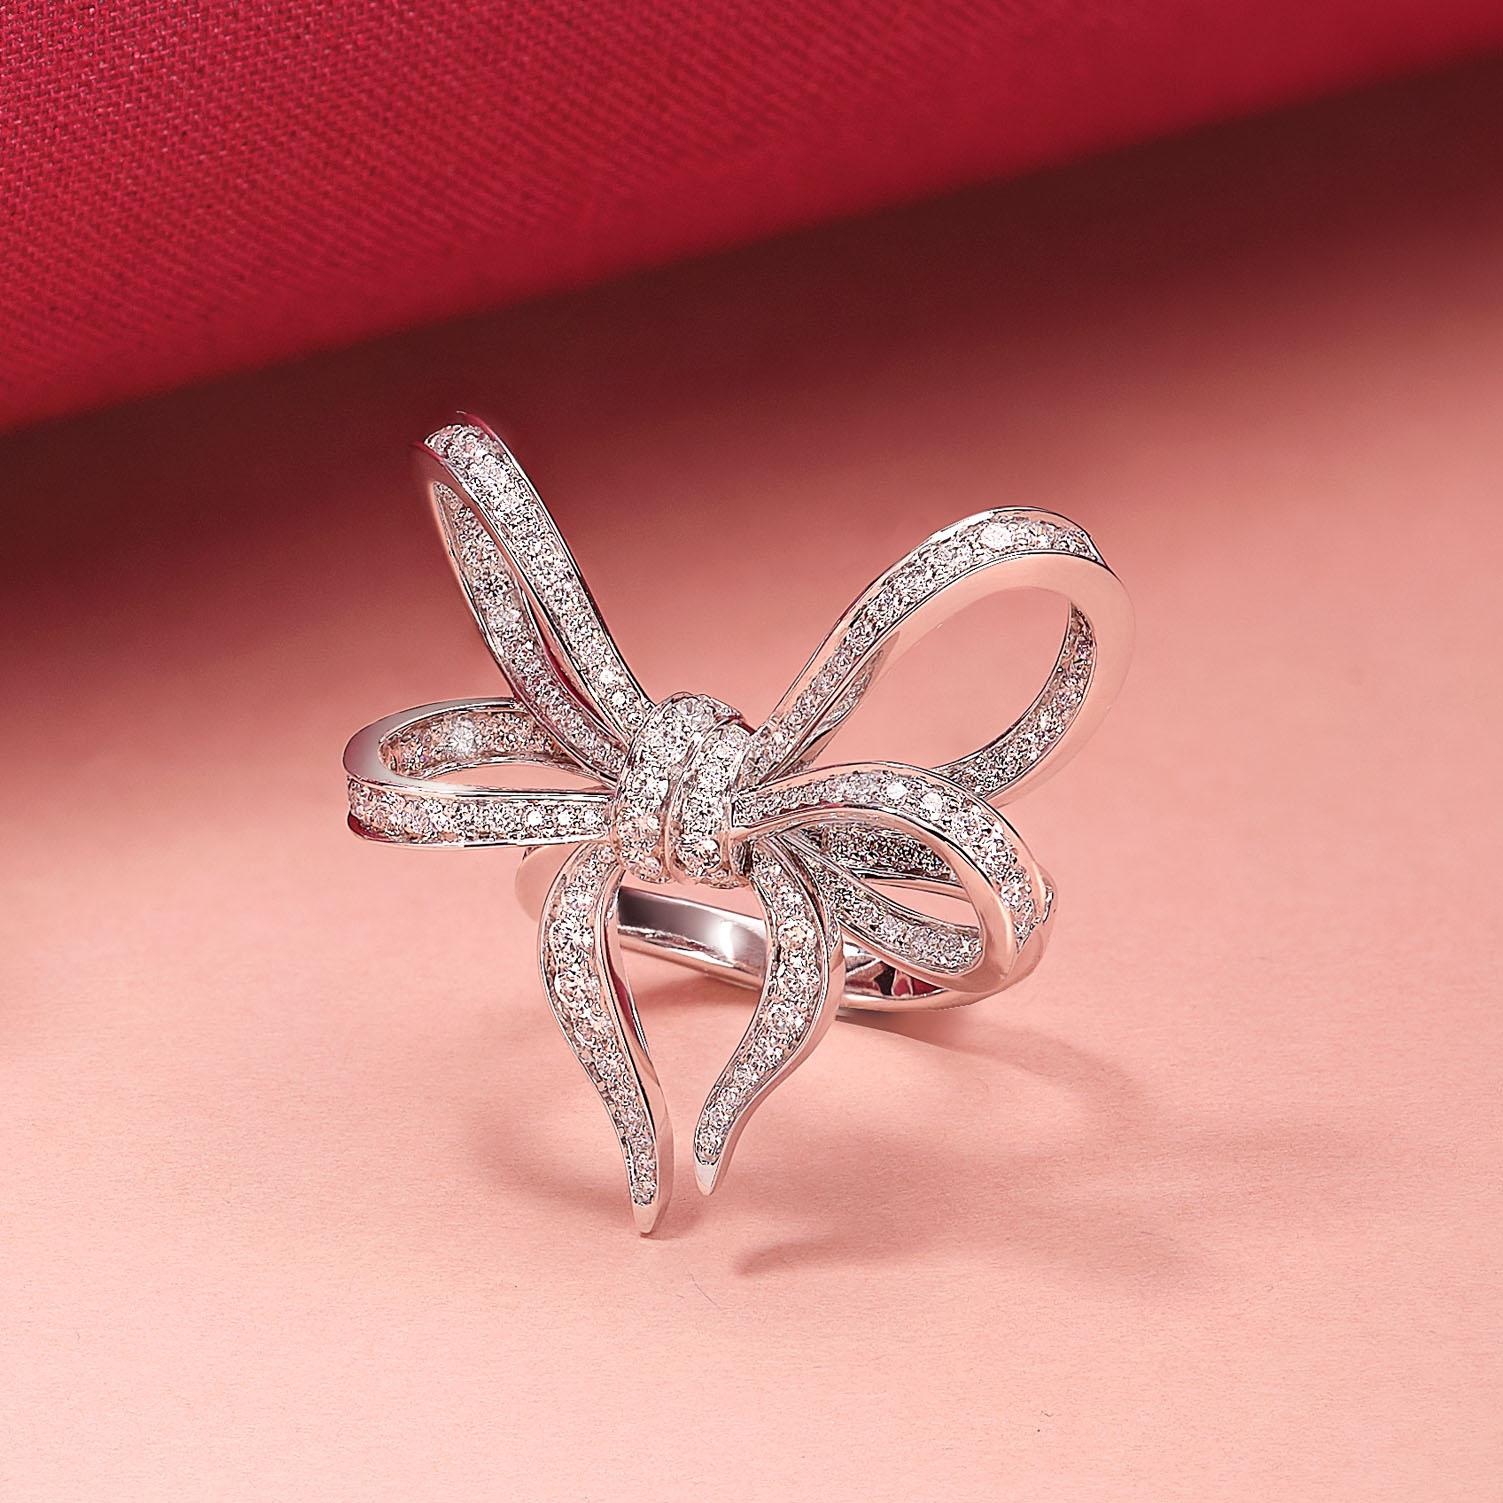 Contemporary 18 Karat White Gold and White Diamonds Bow Cocktail Ring For Sale